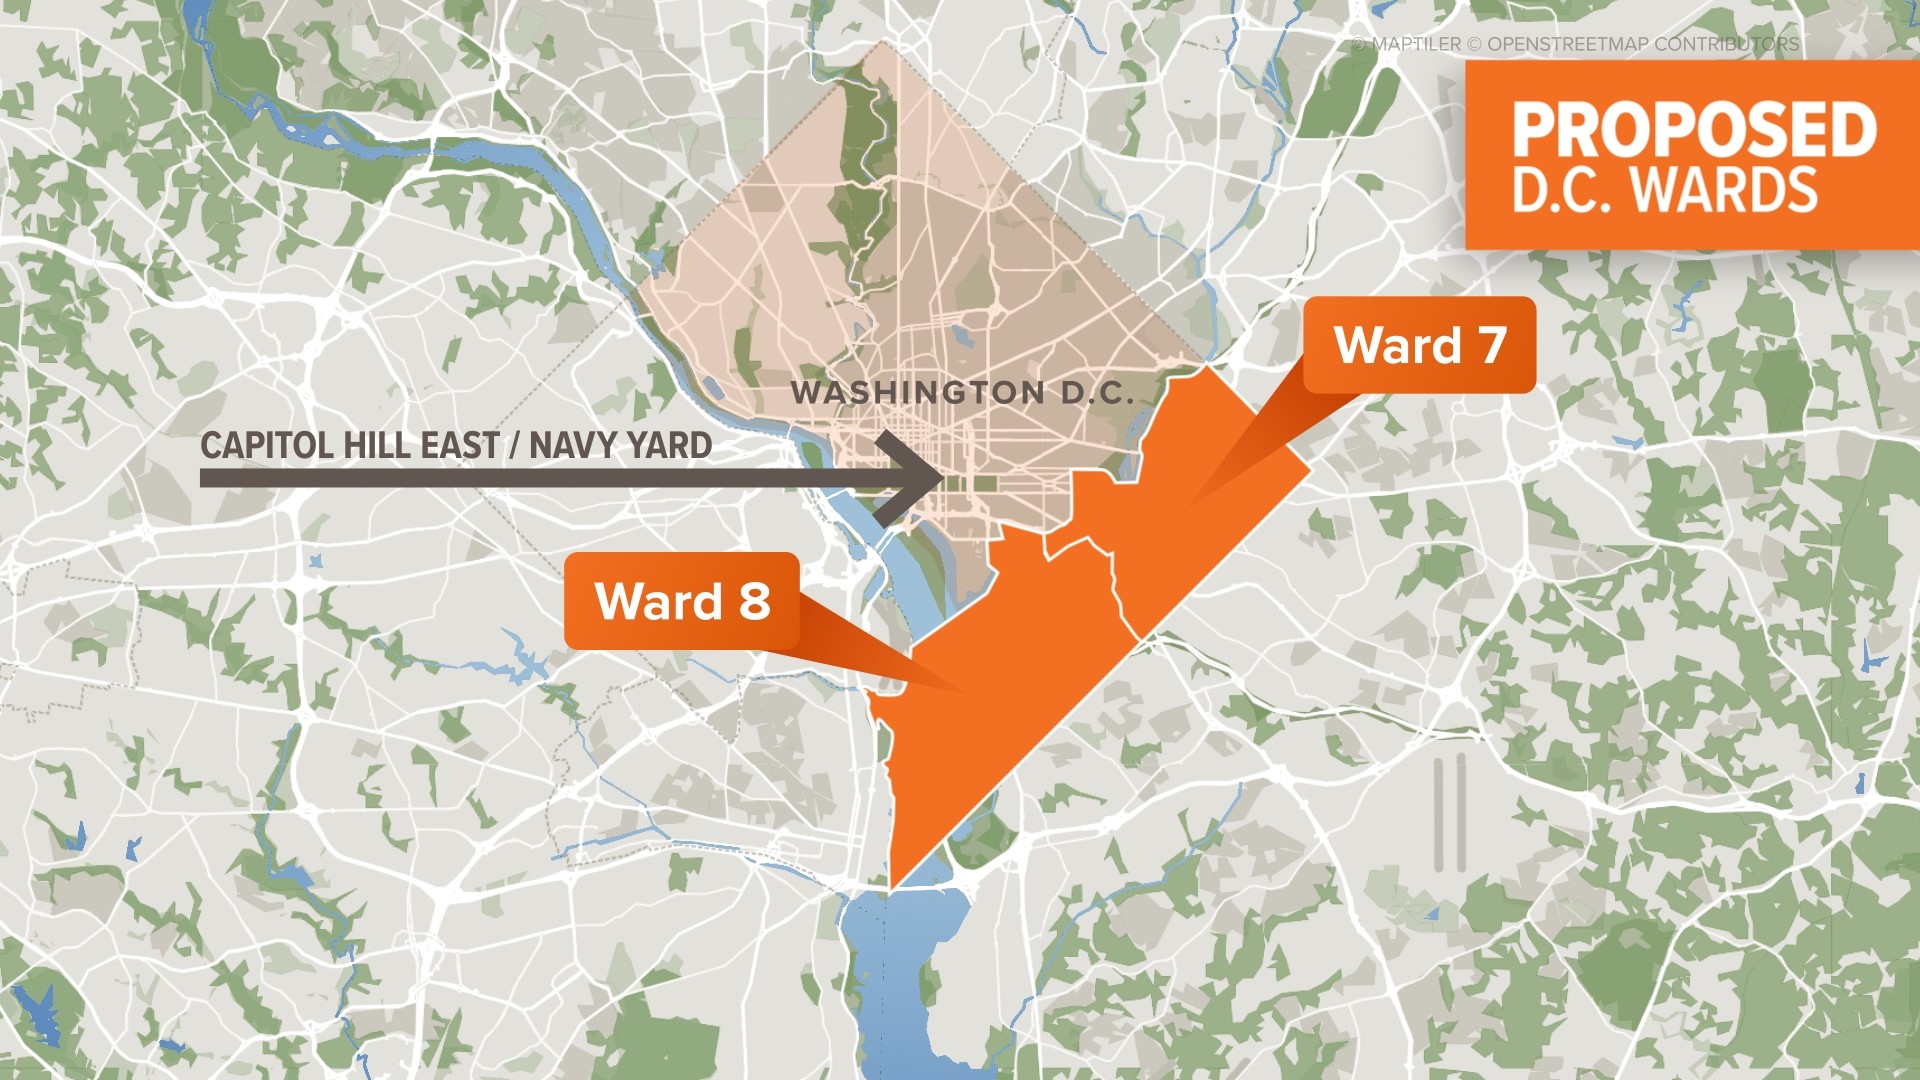 DC's council advances proposal to align parts of Capitol Hill and the Navy Yard with Wards East of Anacostia River.